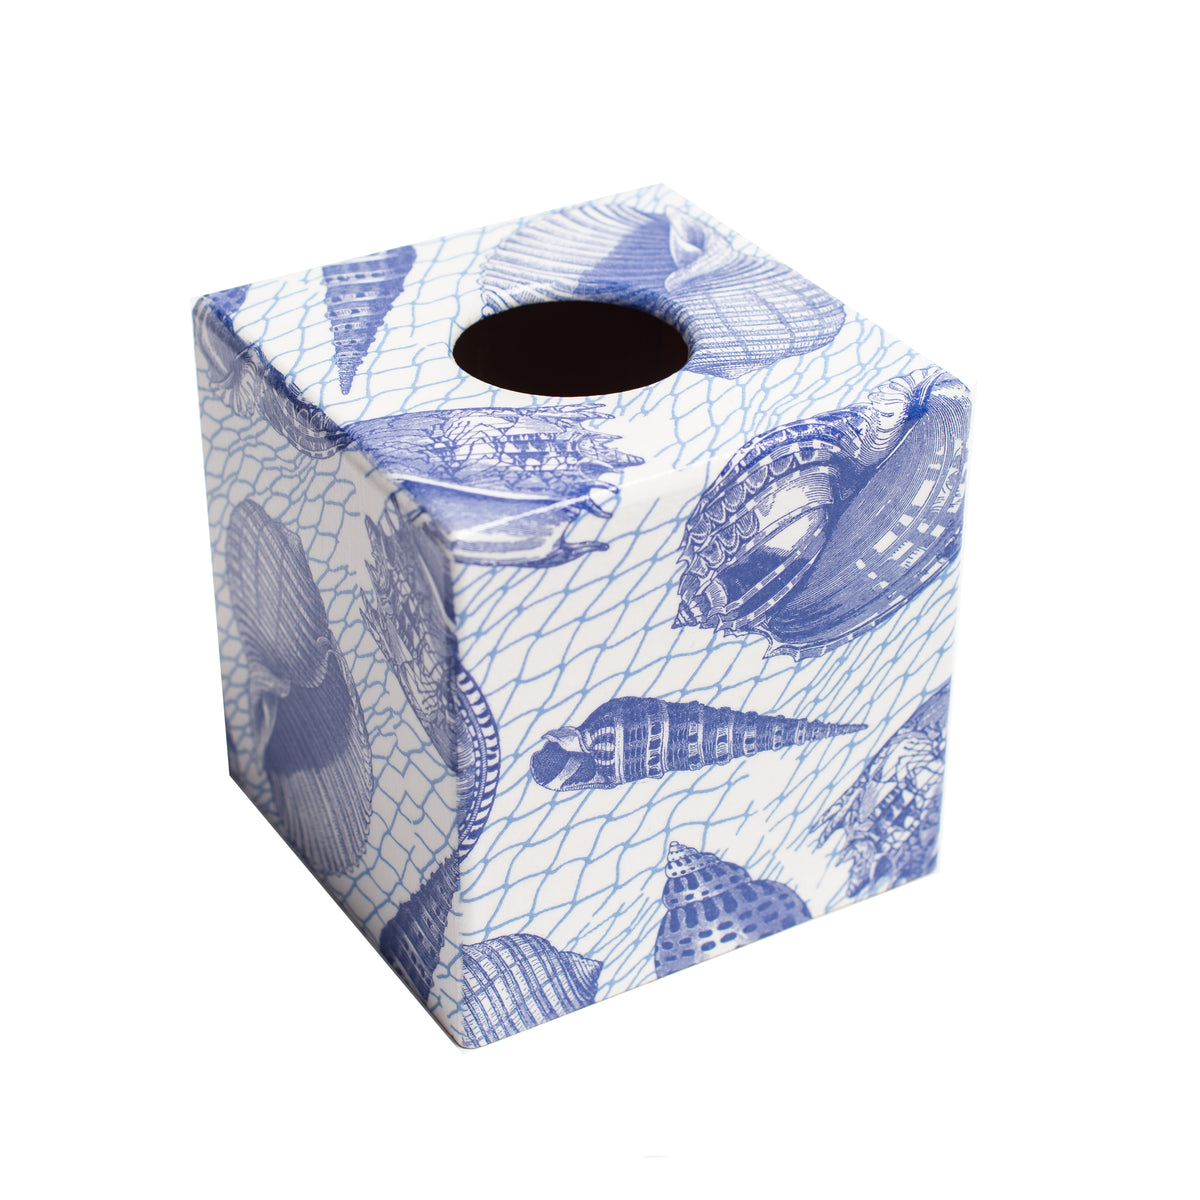 Blue Toile wooden tissue box cover – Crackpots